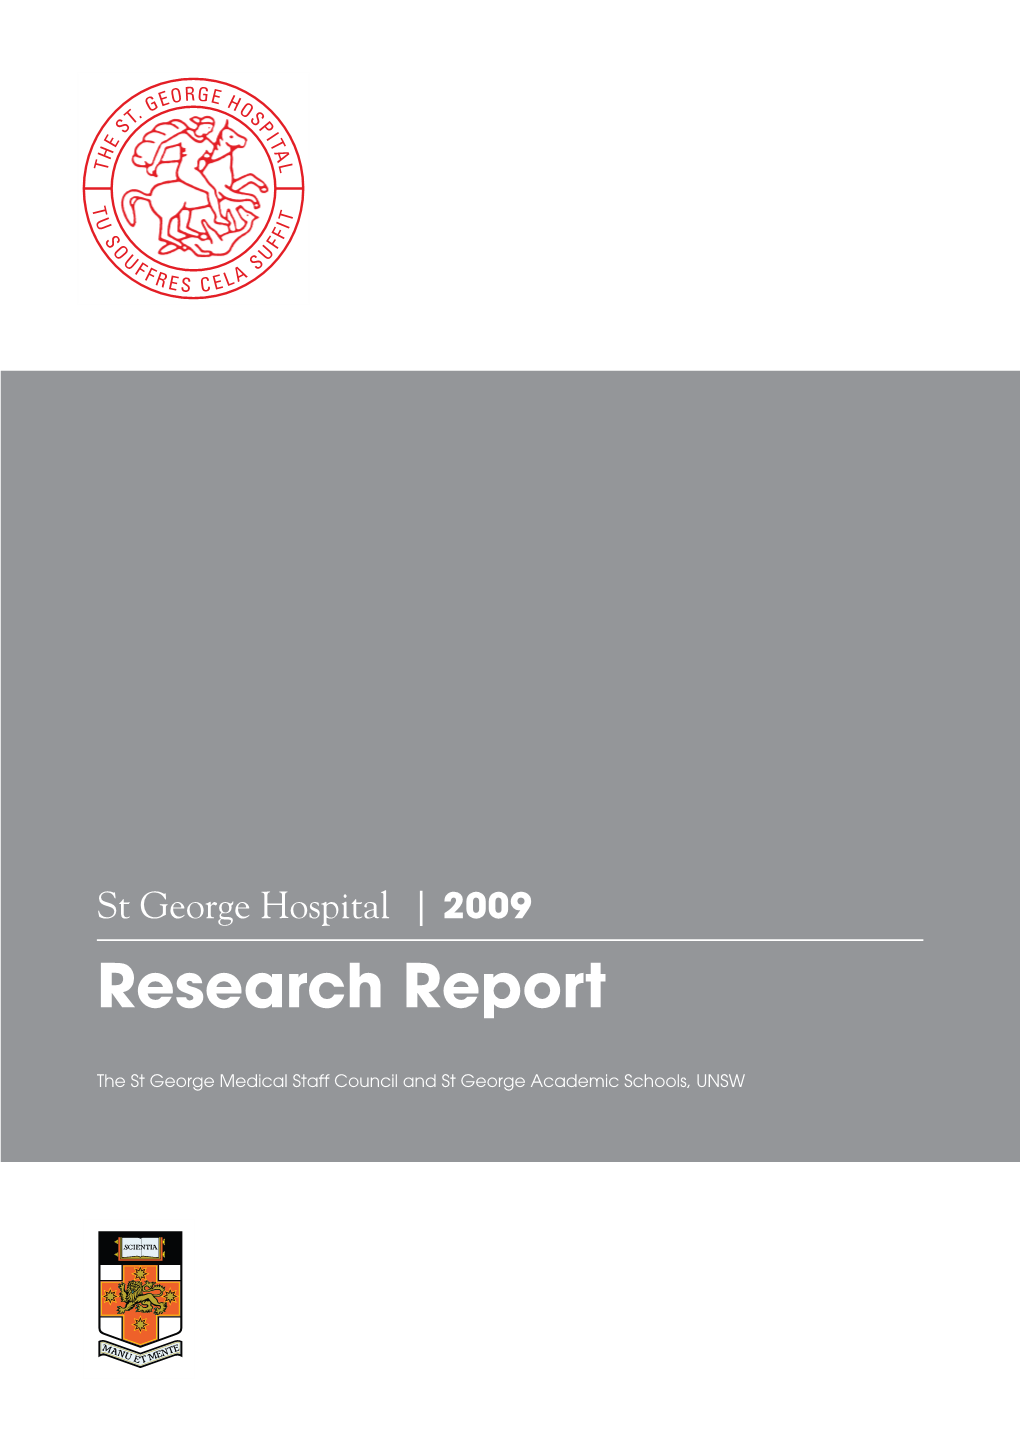 St George Hospital | 2009 Research Report